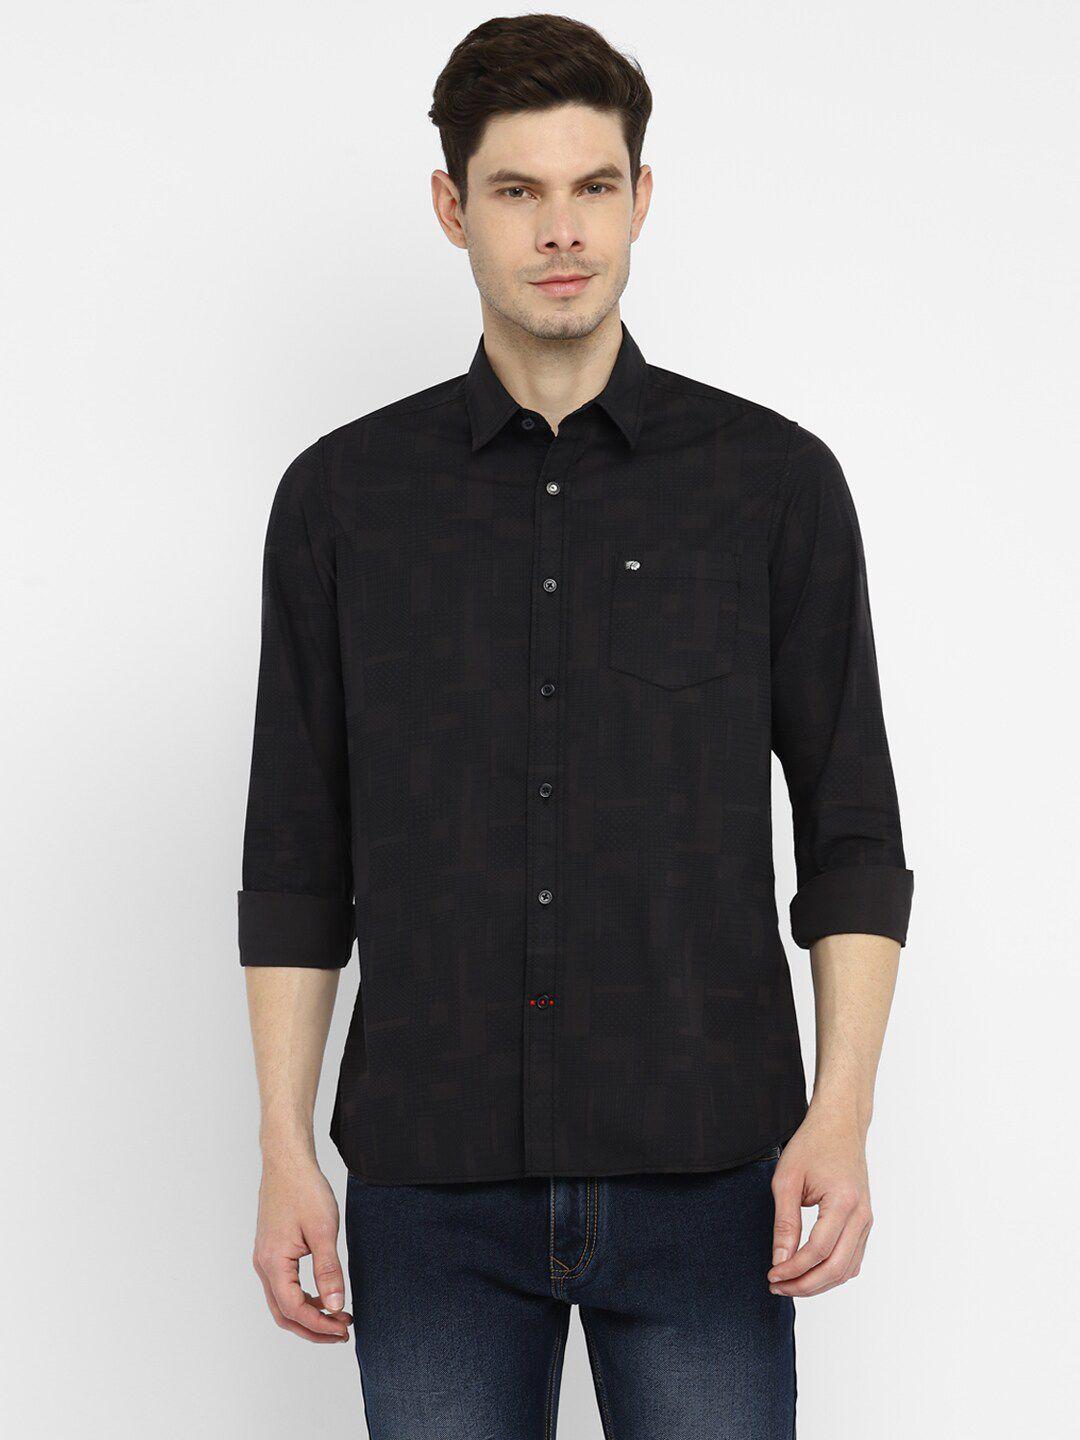 red-chief-men-olive-green-slim-fit-casual-shirt